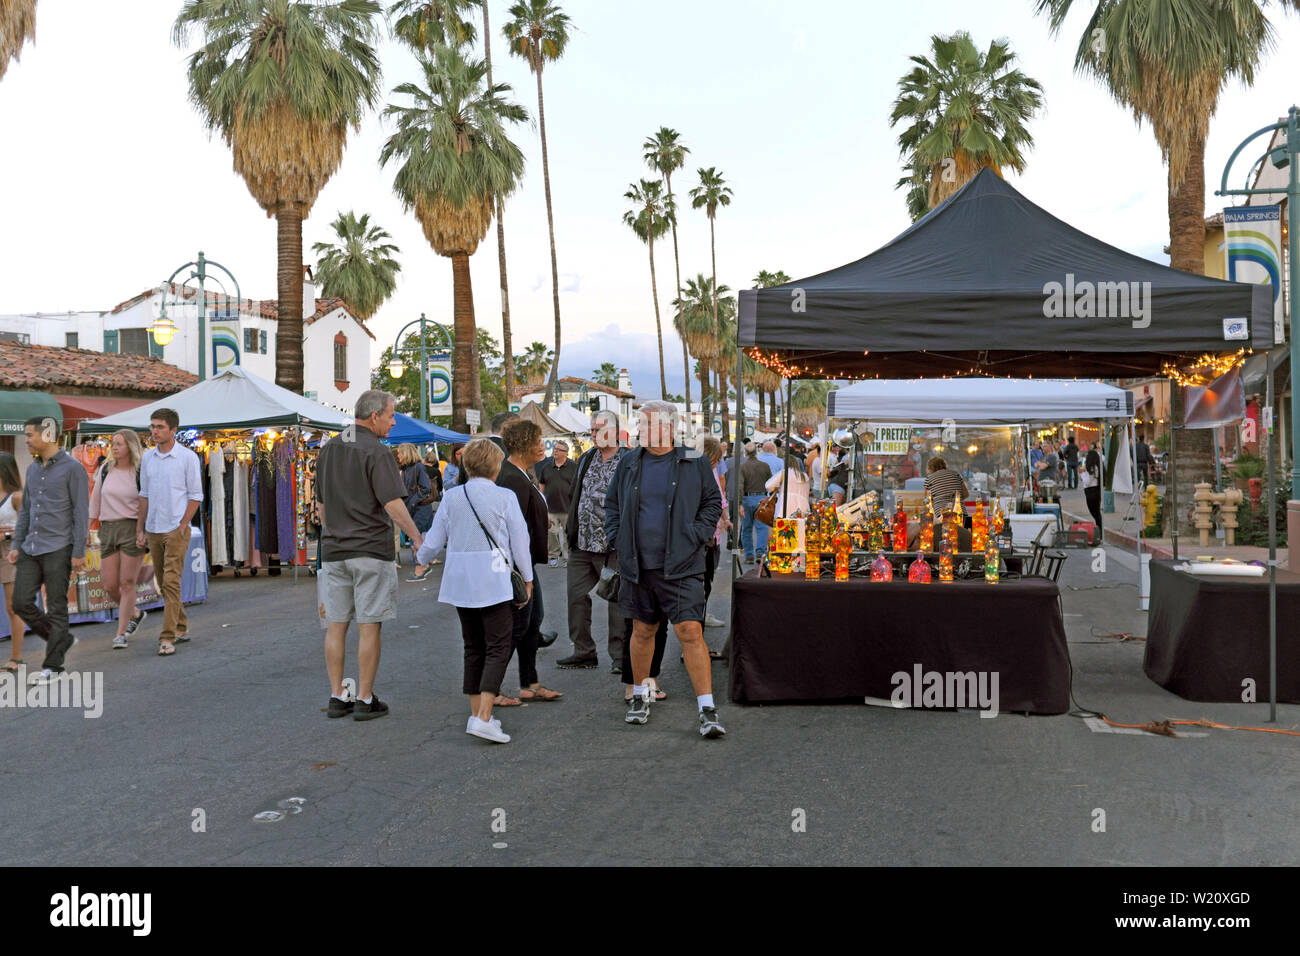 People enjoy the Villagefest in downtown Palm Springs, California. The Thursday night street fair features arts, crafts, food, and entertainment. Stock Photo